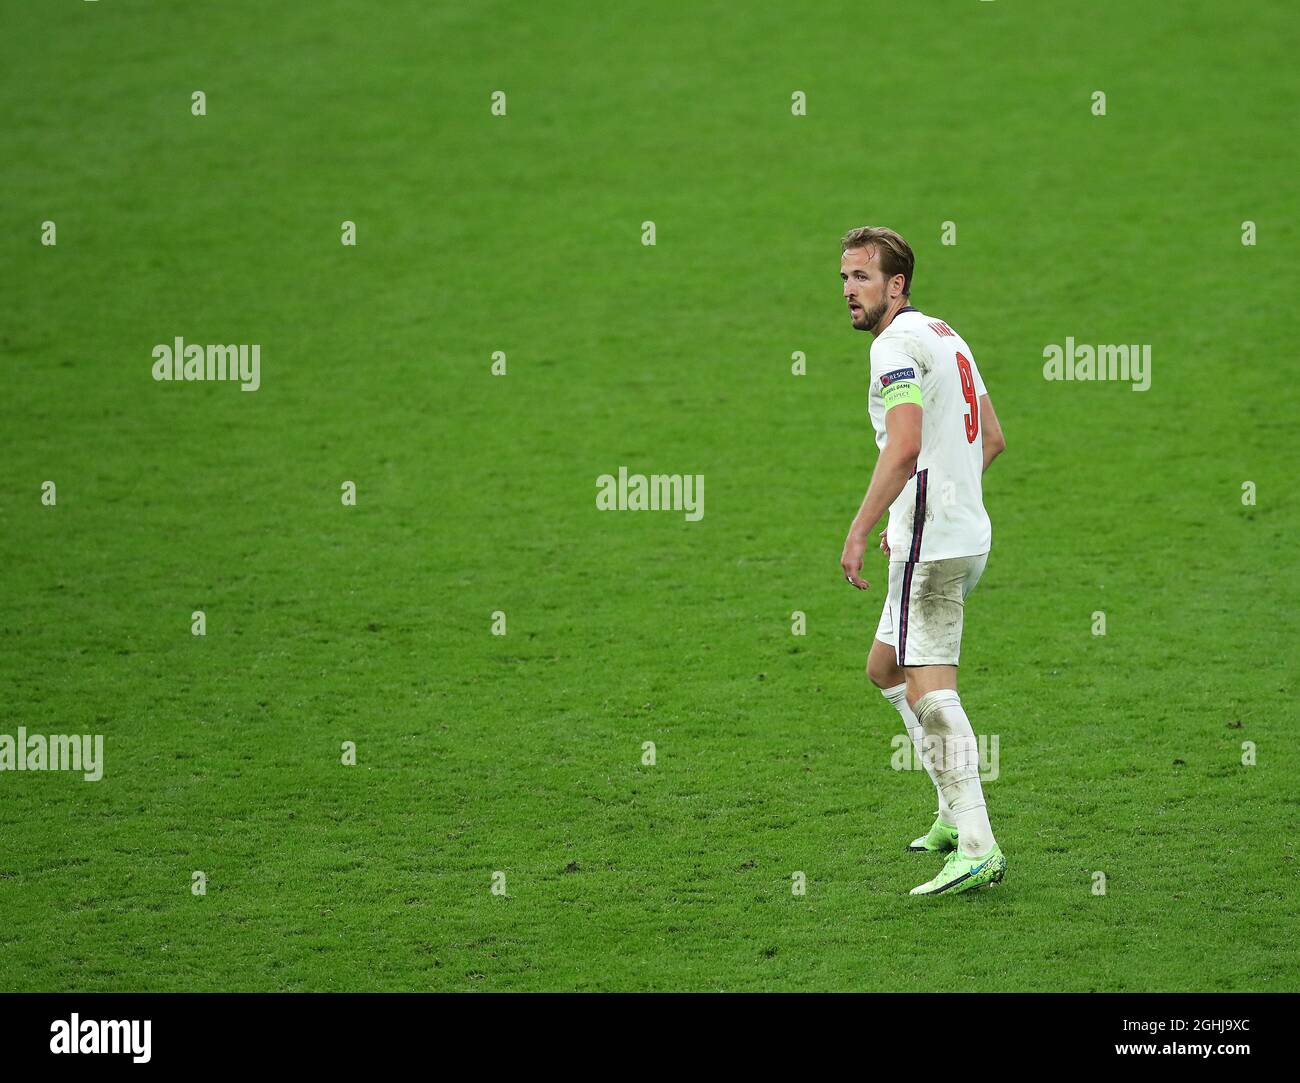 London, England, 11th July 2021. Harry Kane of England during the UEFA European Championships final match at Wembley Stadium, London. Picture credit should read: David Klein / Sportimage via PA Images Stock Photo